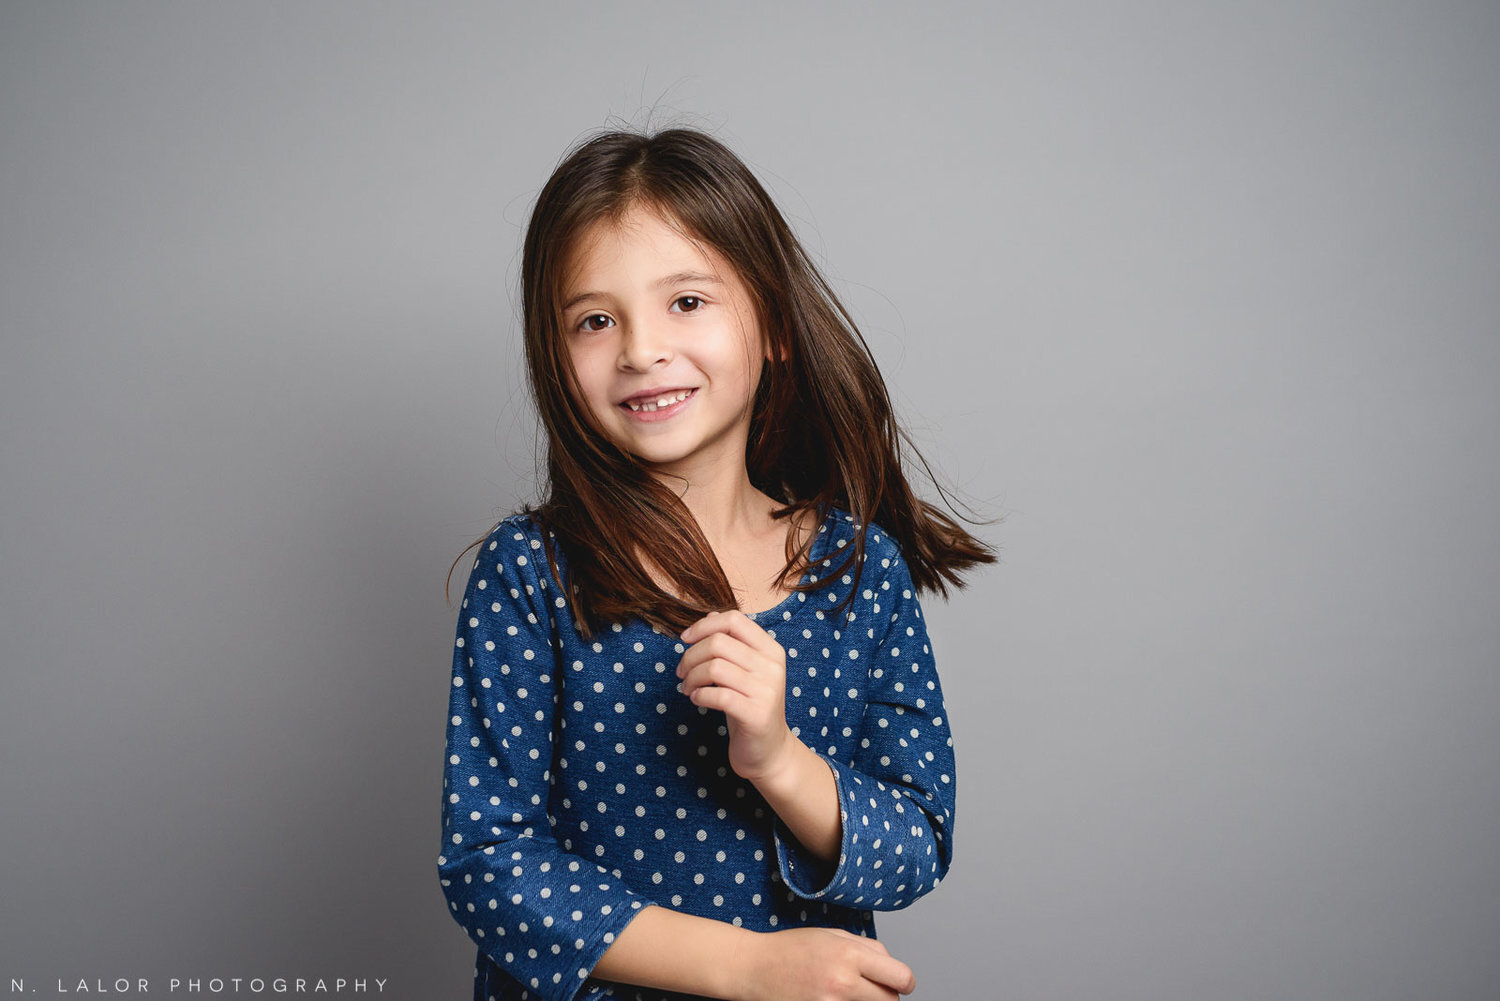 nlalor-photography-2016-12-13-studio-family-two-girls-greenwich-connecticut-4.jpg